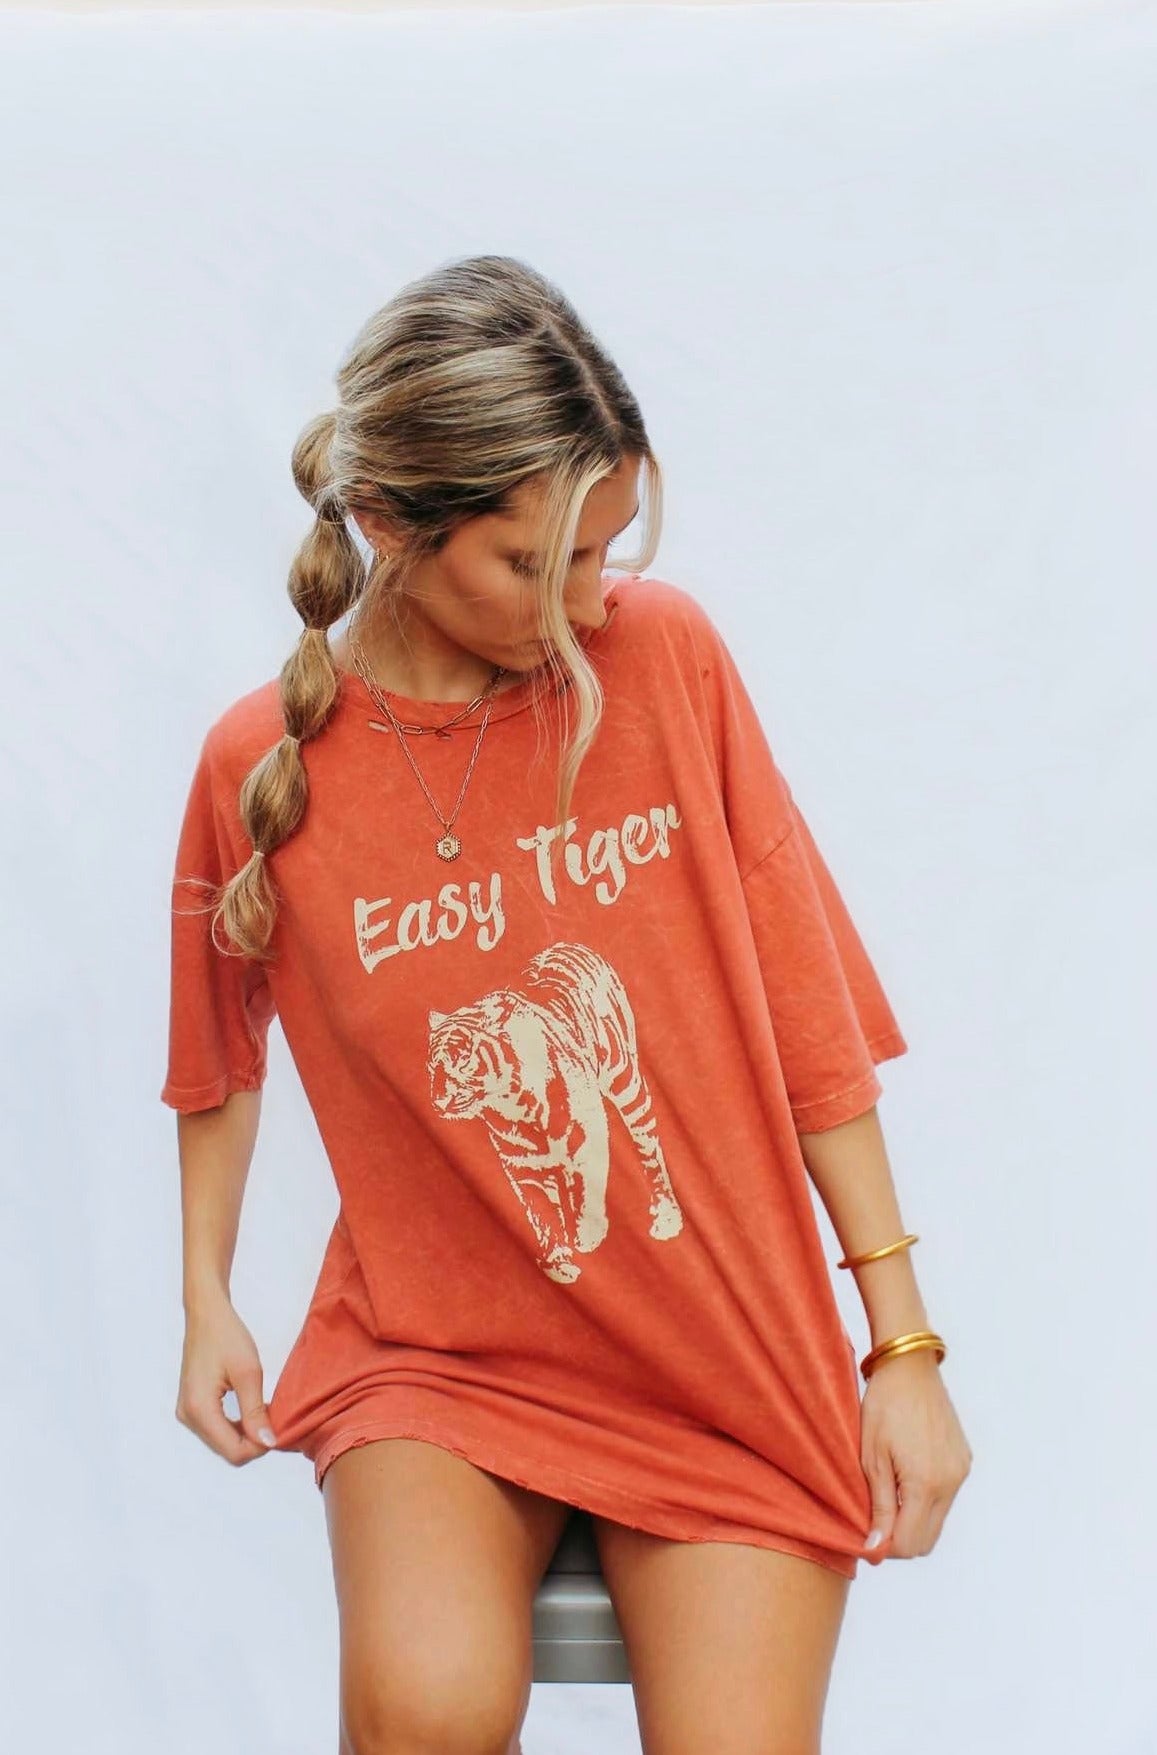 Tiger Graphic Tee, Women's Oversized T-Shirt, Tropical Jungle Vintage Tee,  Get em Tiger, tshirt for women, Gift for her, Grunge Tiger Shirt